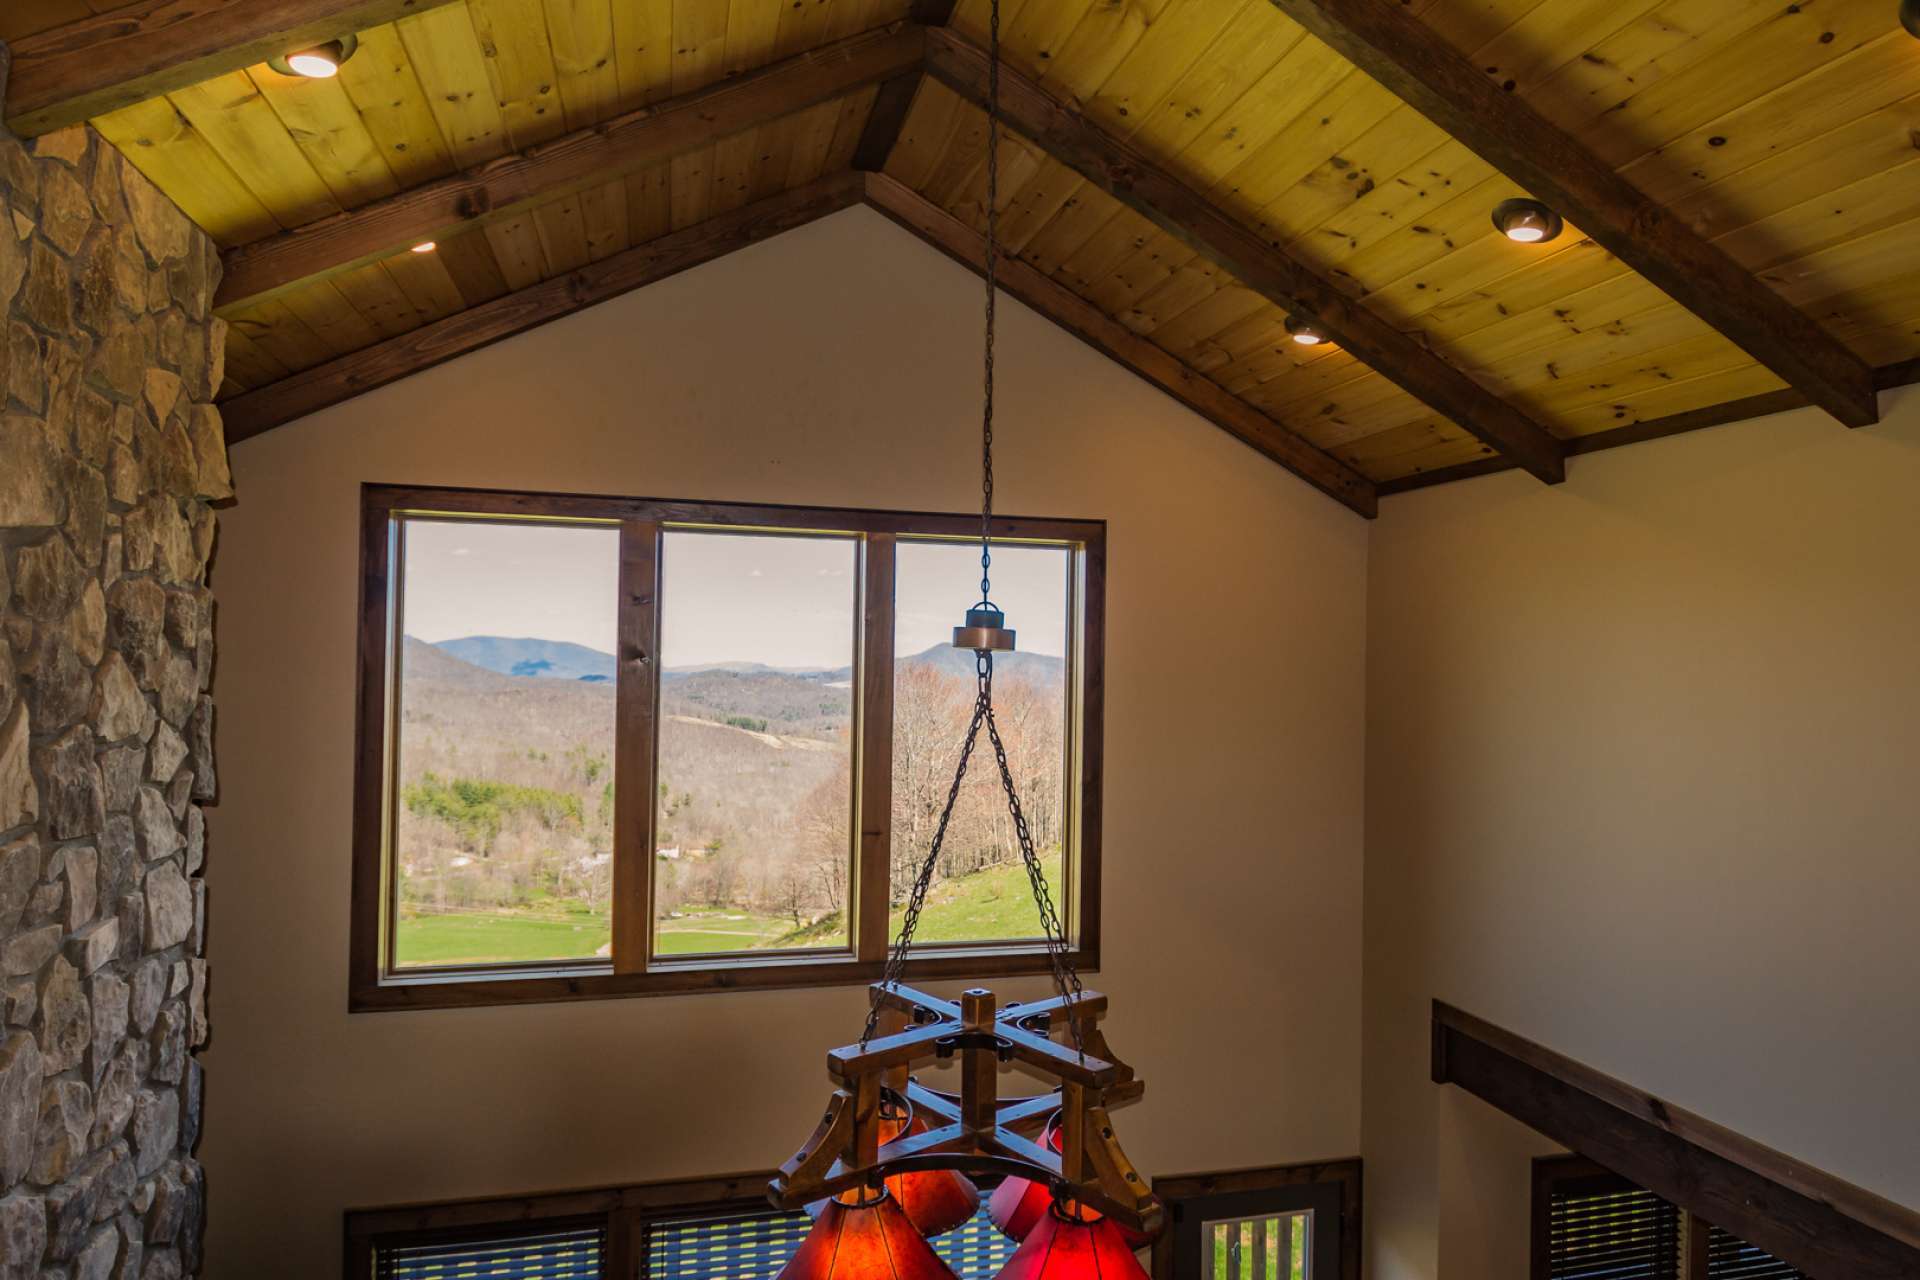 As we make our way upstairs, take note of the  craftsman details and the  views.